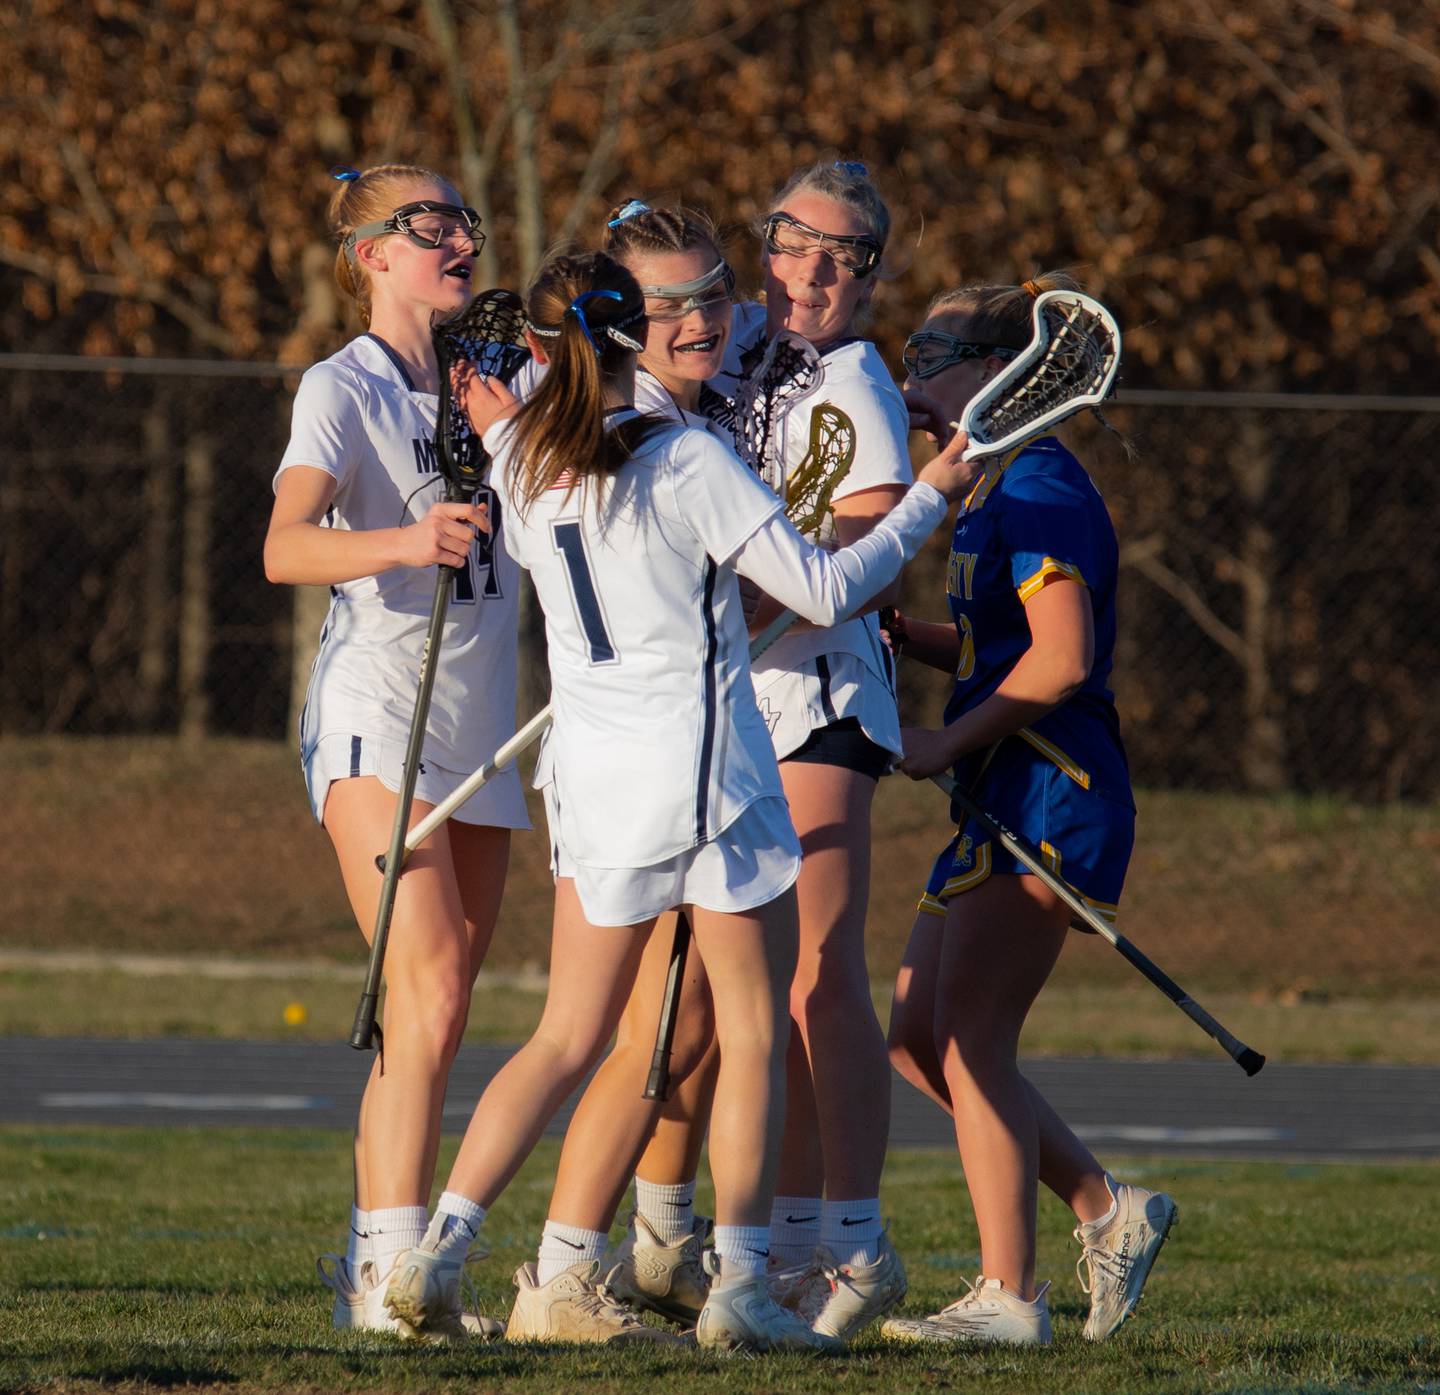 Manchester Valley celebrate after a goal by Haylee Bittinger in Thursday's Carroll County girls lacrosse match. The No. 11 Mavericks scored the game's first 9 goals en route to a 13-6 victory over 13th-ranked Liberty in Manchester.